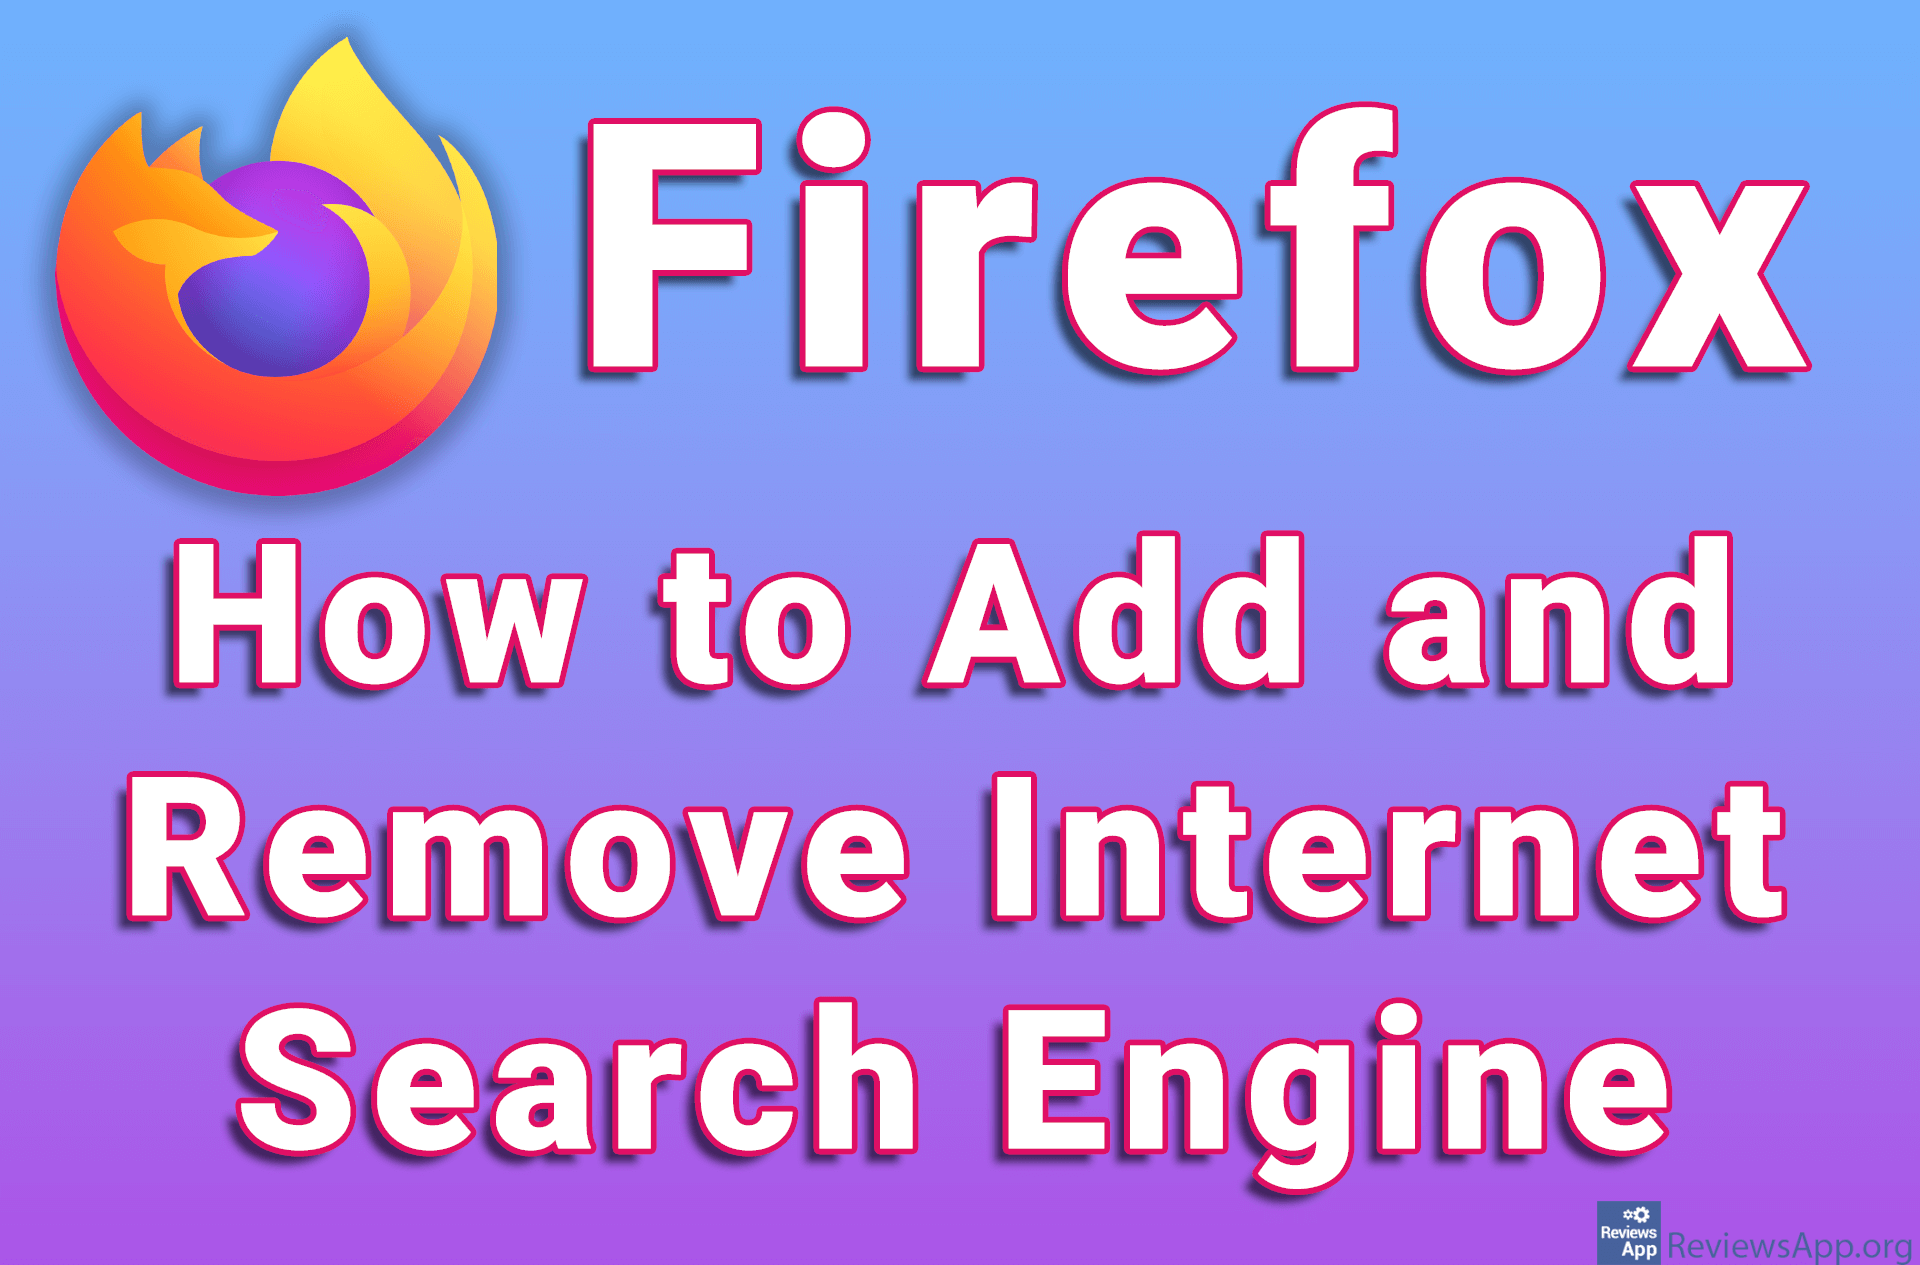 Firefox – How to Add and Remove Internet Search Engine